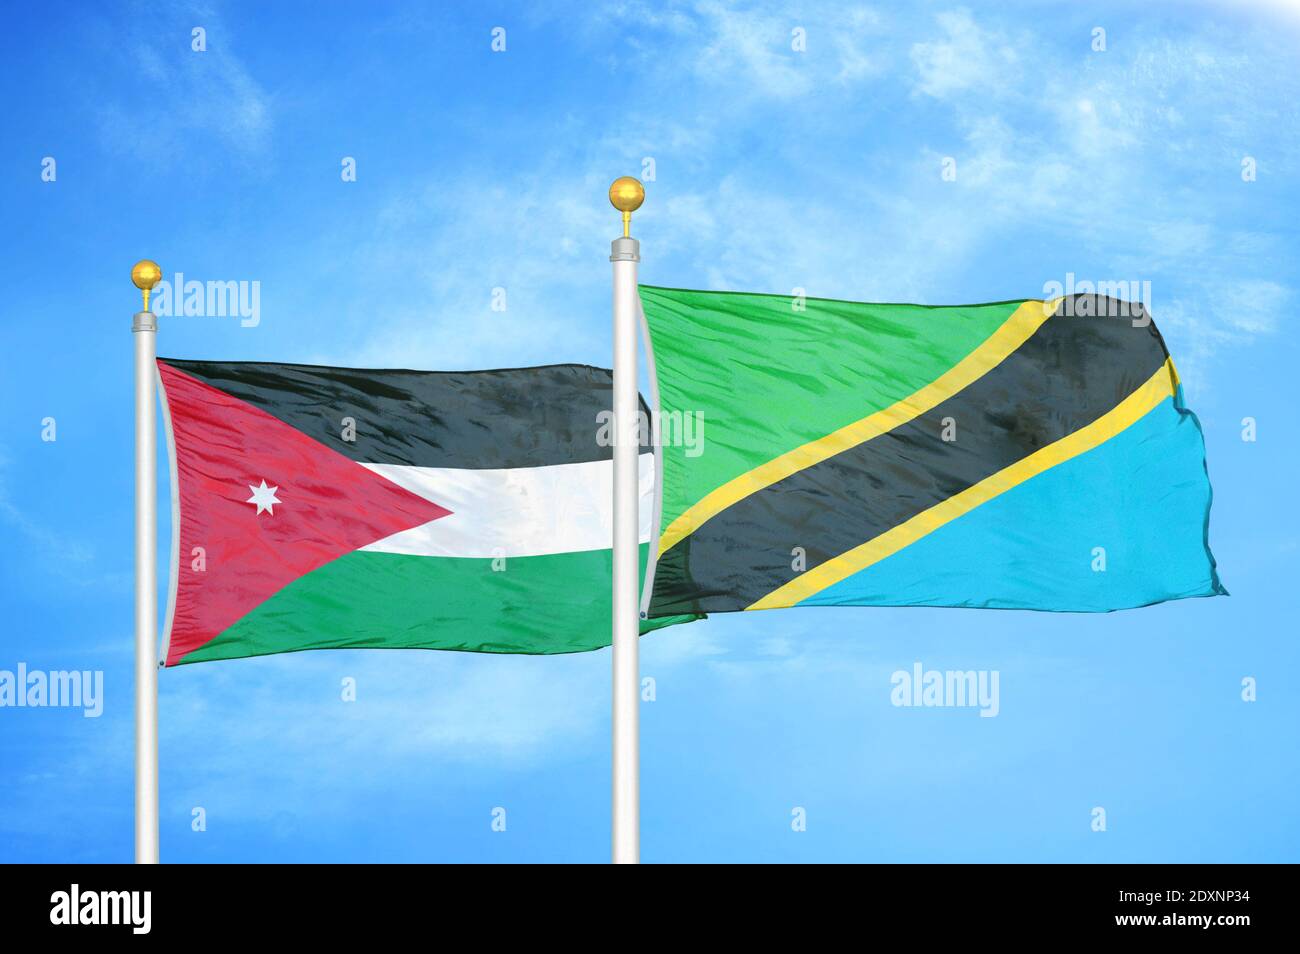 Jordan and Tanzania two flags on flagpoles and blue cloudy sky Stock Photo